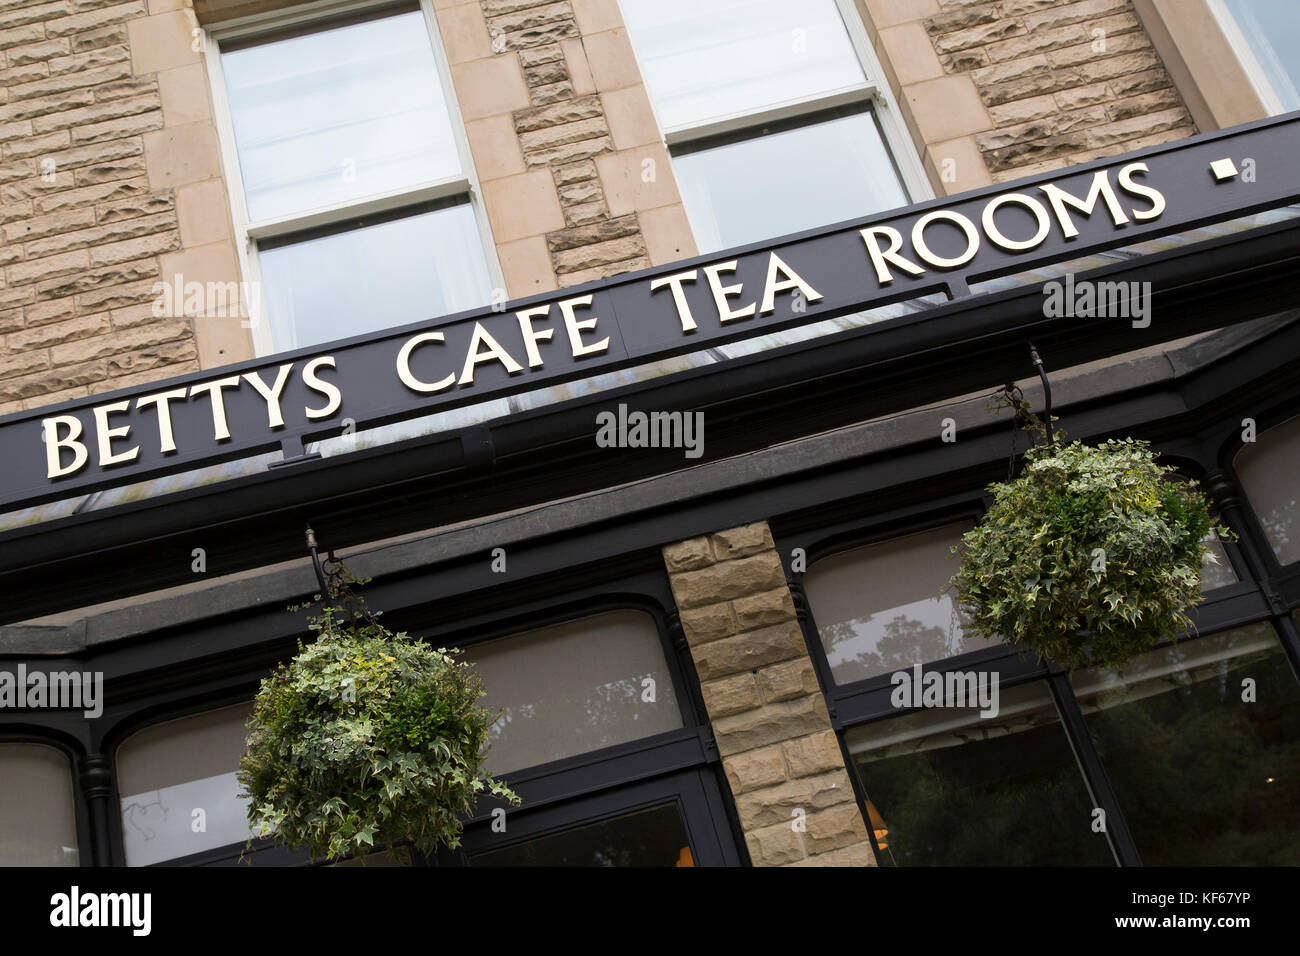 Sign for Bettys Cafe Tea Rooms in Harrogate, England. The cafe was opened in 1919. Stock Photo